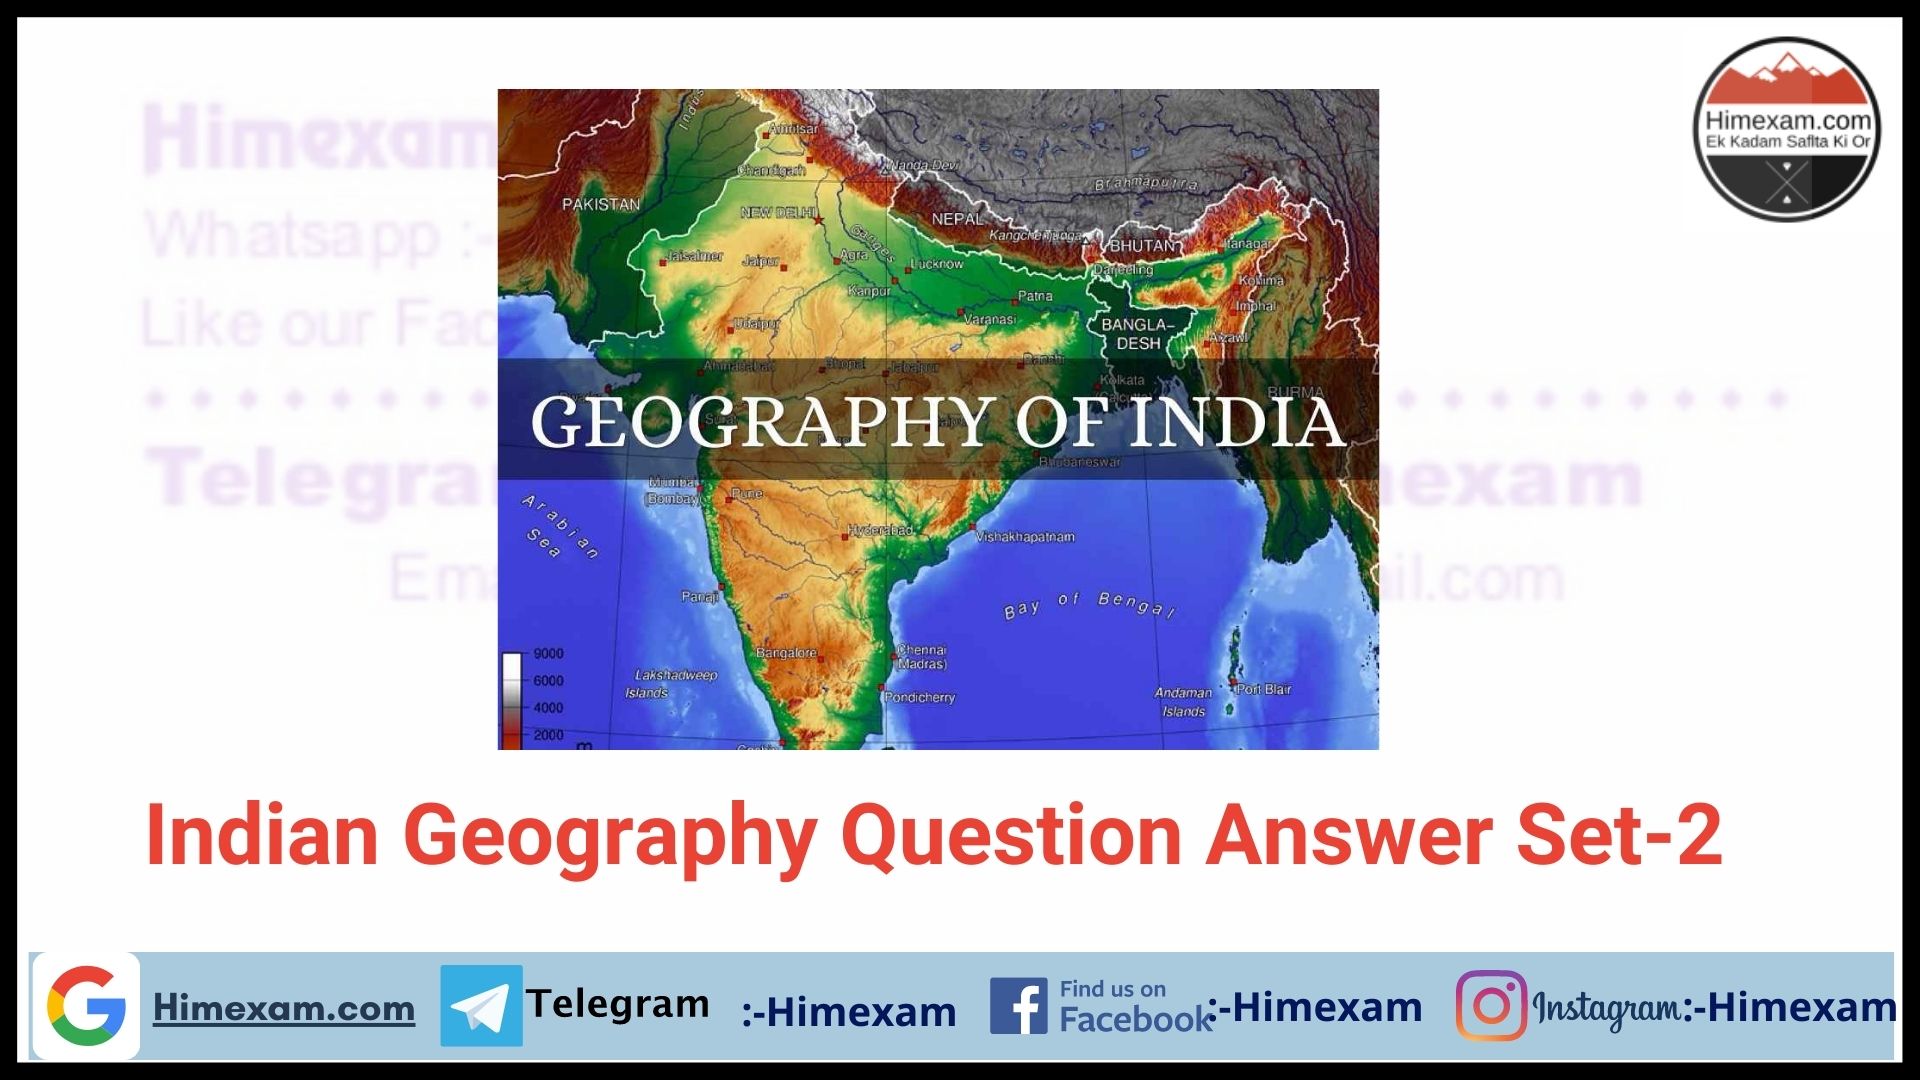 Indian Geography Question Answer Set-2